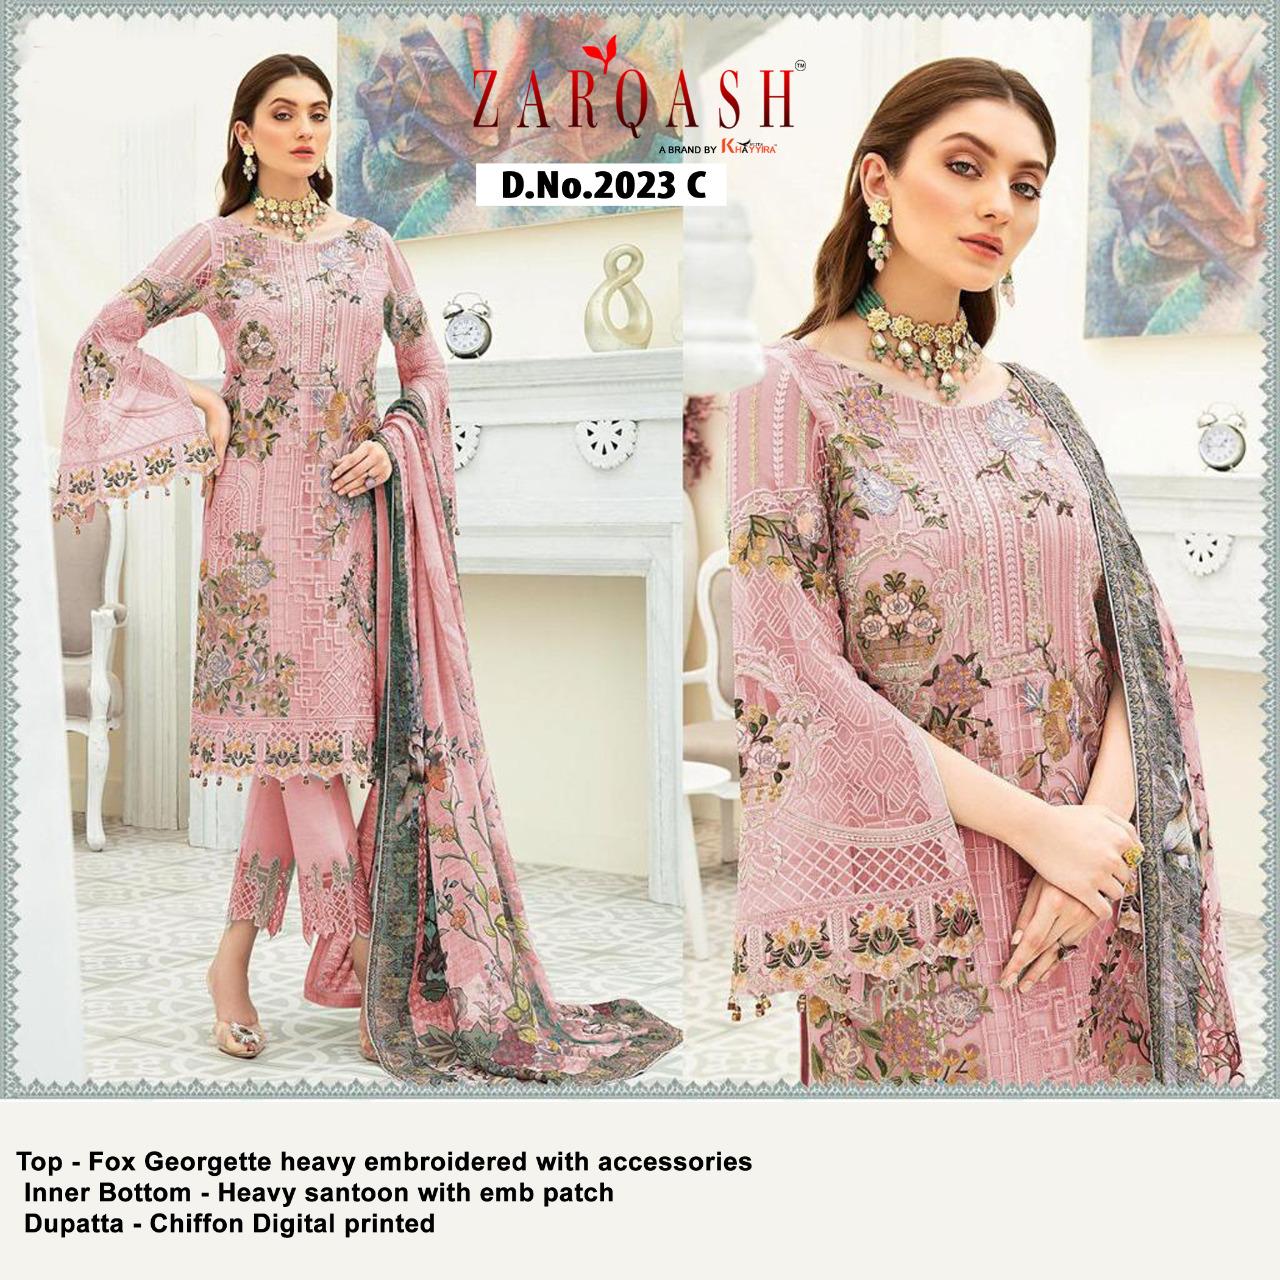 ZARQASH 2023 C PAKISTANI SUITS SUPPLIER IN INDIA